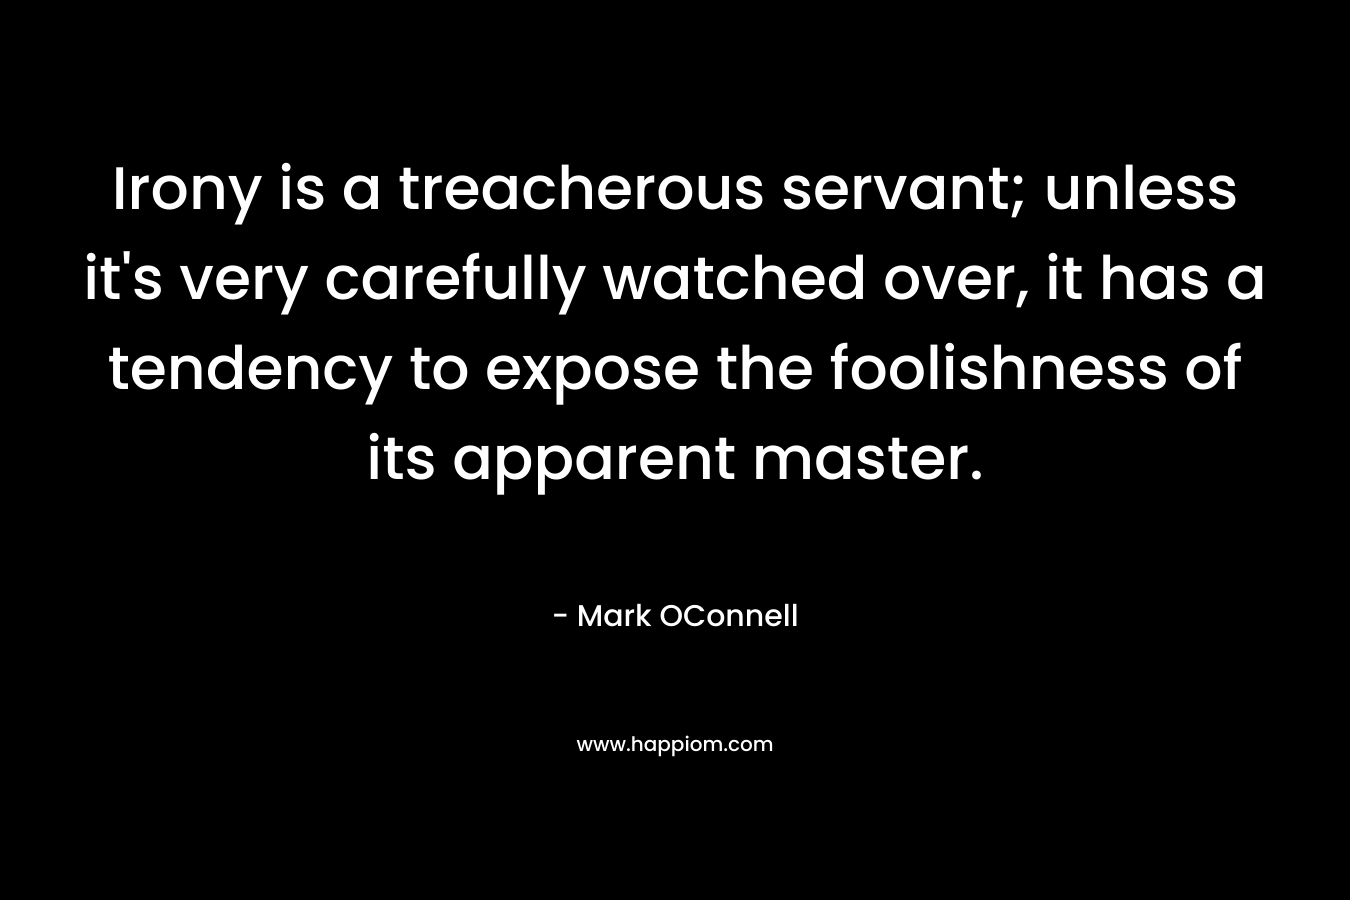 Irony is a treacherous servant; unless it’s very carefully watched over, it has a tendency to expose the foolishness of its apparent master. – Mark OConnell